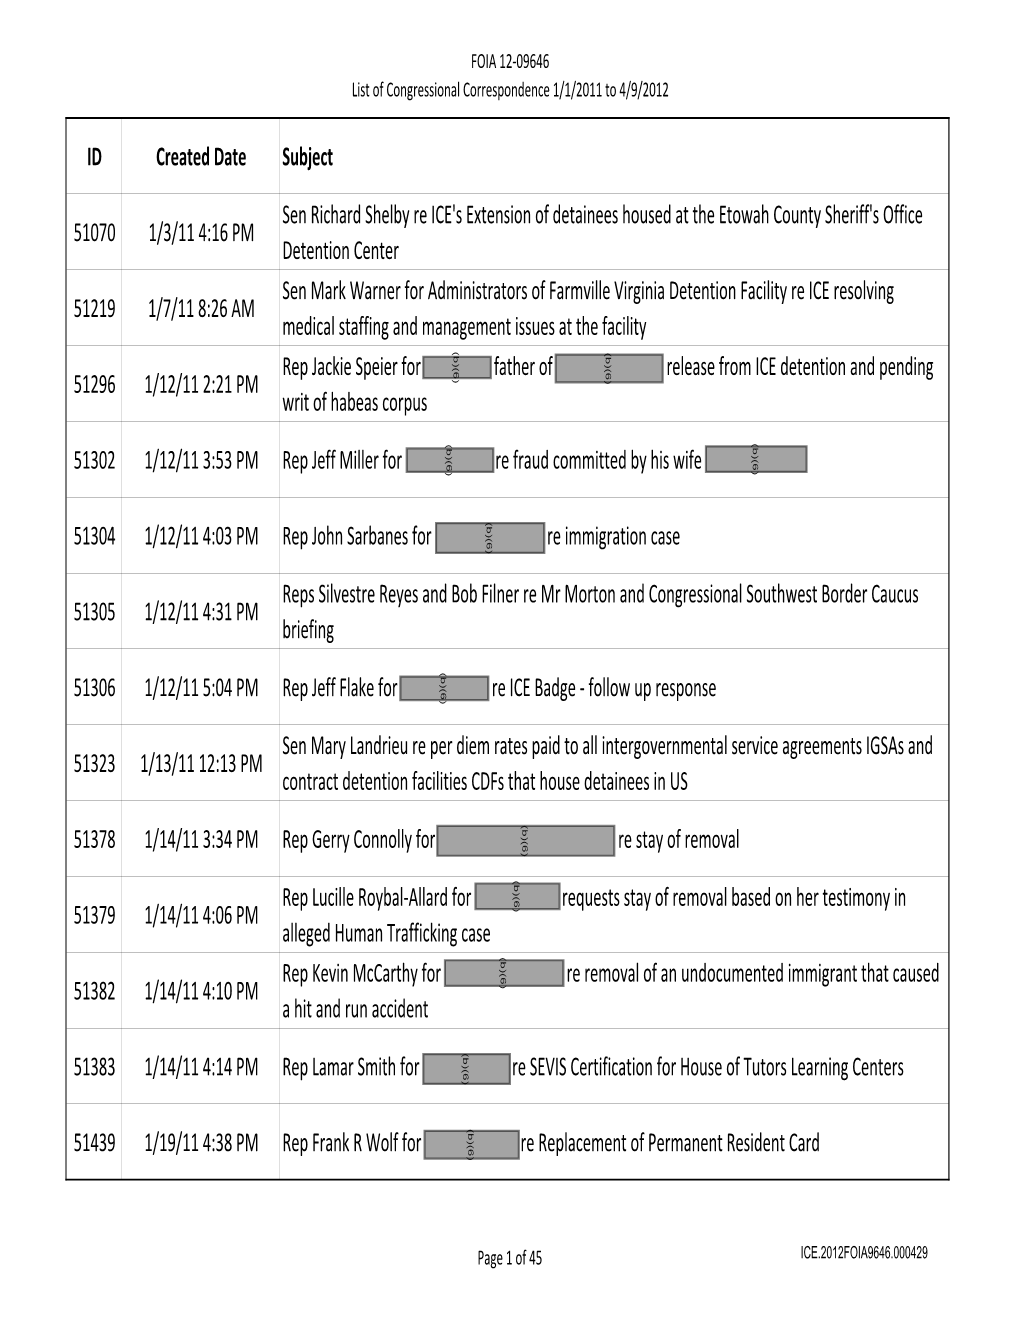 FOIA 12-09646 List of Congressional Correspondence 1/1/2011 To